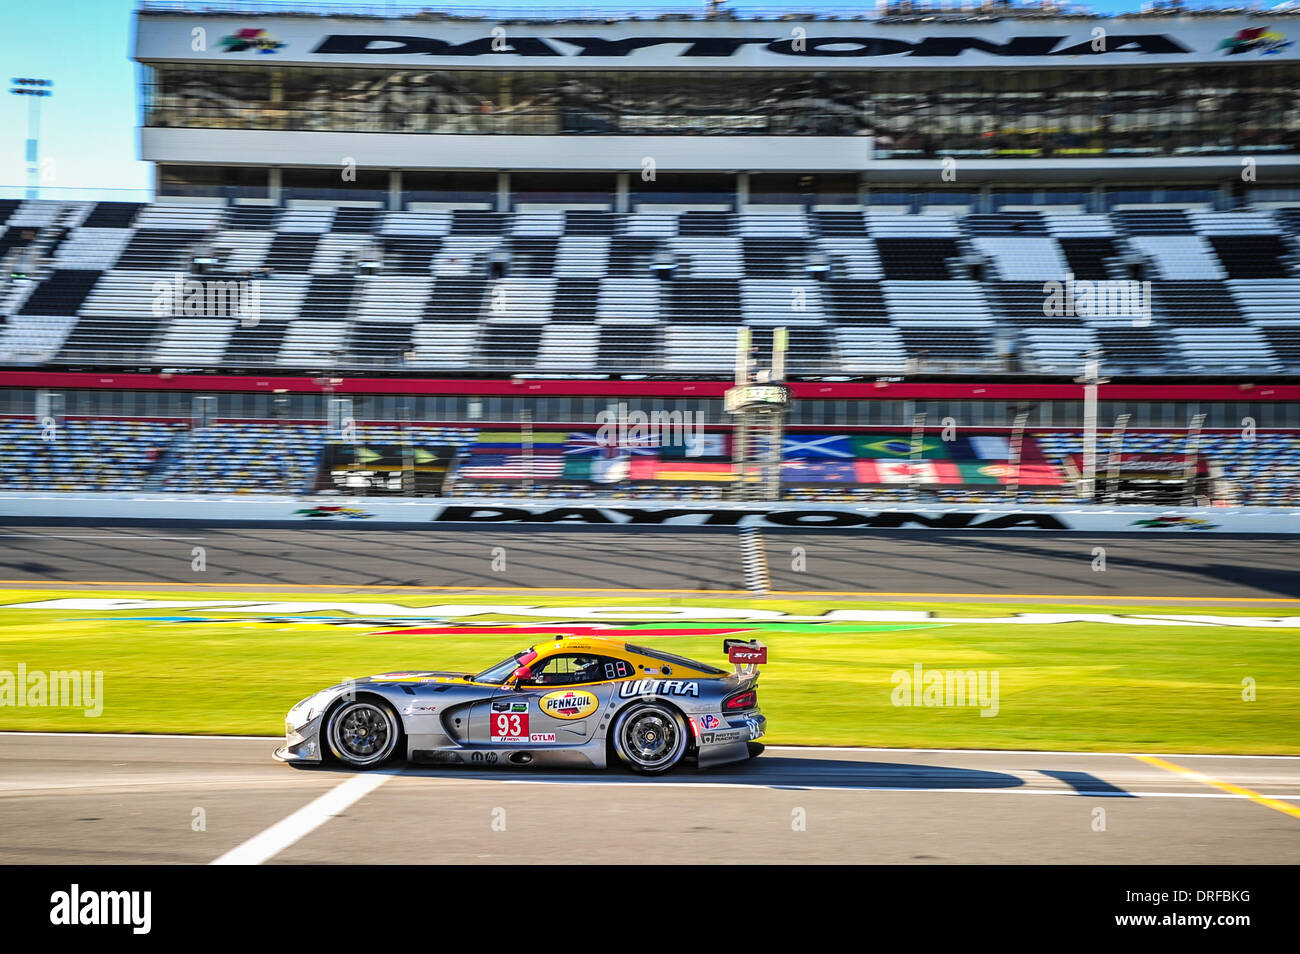 Daytona, USA. 23rd Jan, 2014. The Tudor United Sportcar Championship Rolex 24 Hours of Daytona Practise which was newly formed by the merge of Grand-Am series and the American Le Mans Series . #93 SRT MOTORSPORTS SRT VIPER GTS-R VIPER V10 JONATHAN BOMARITO (USA) KUNO WITTMER (CAN) ROB BELL (GBR) Credit:  Action Plus Sports/Alamy Live News Stock Photo